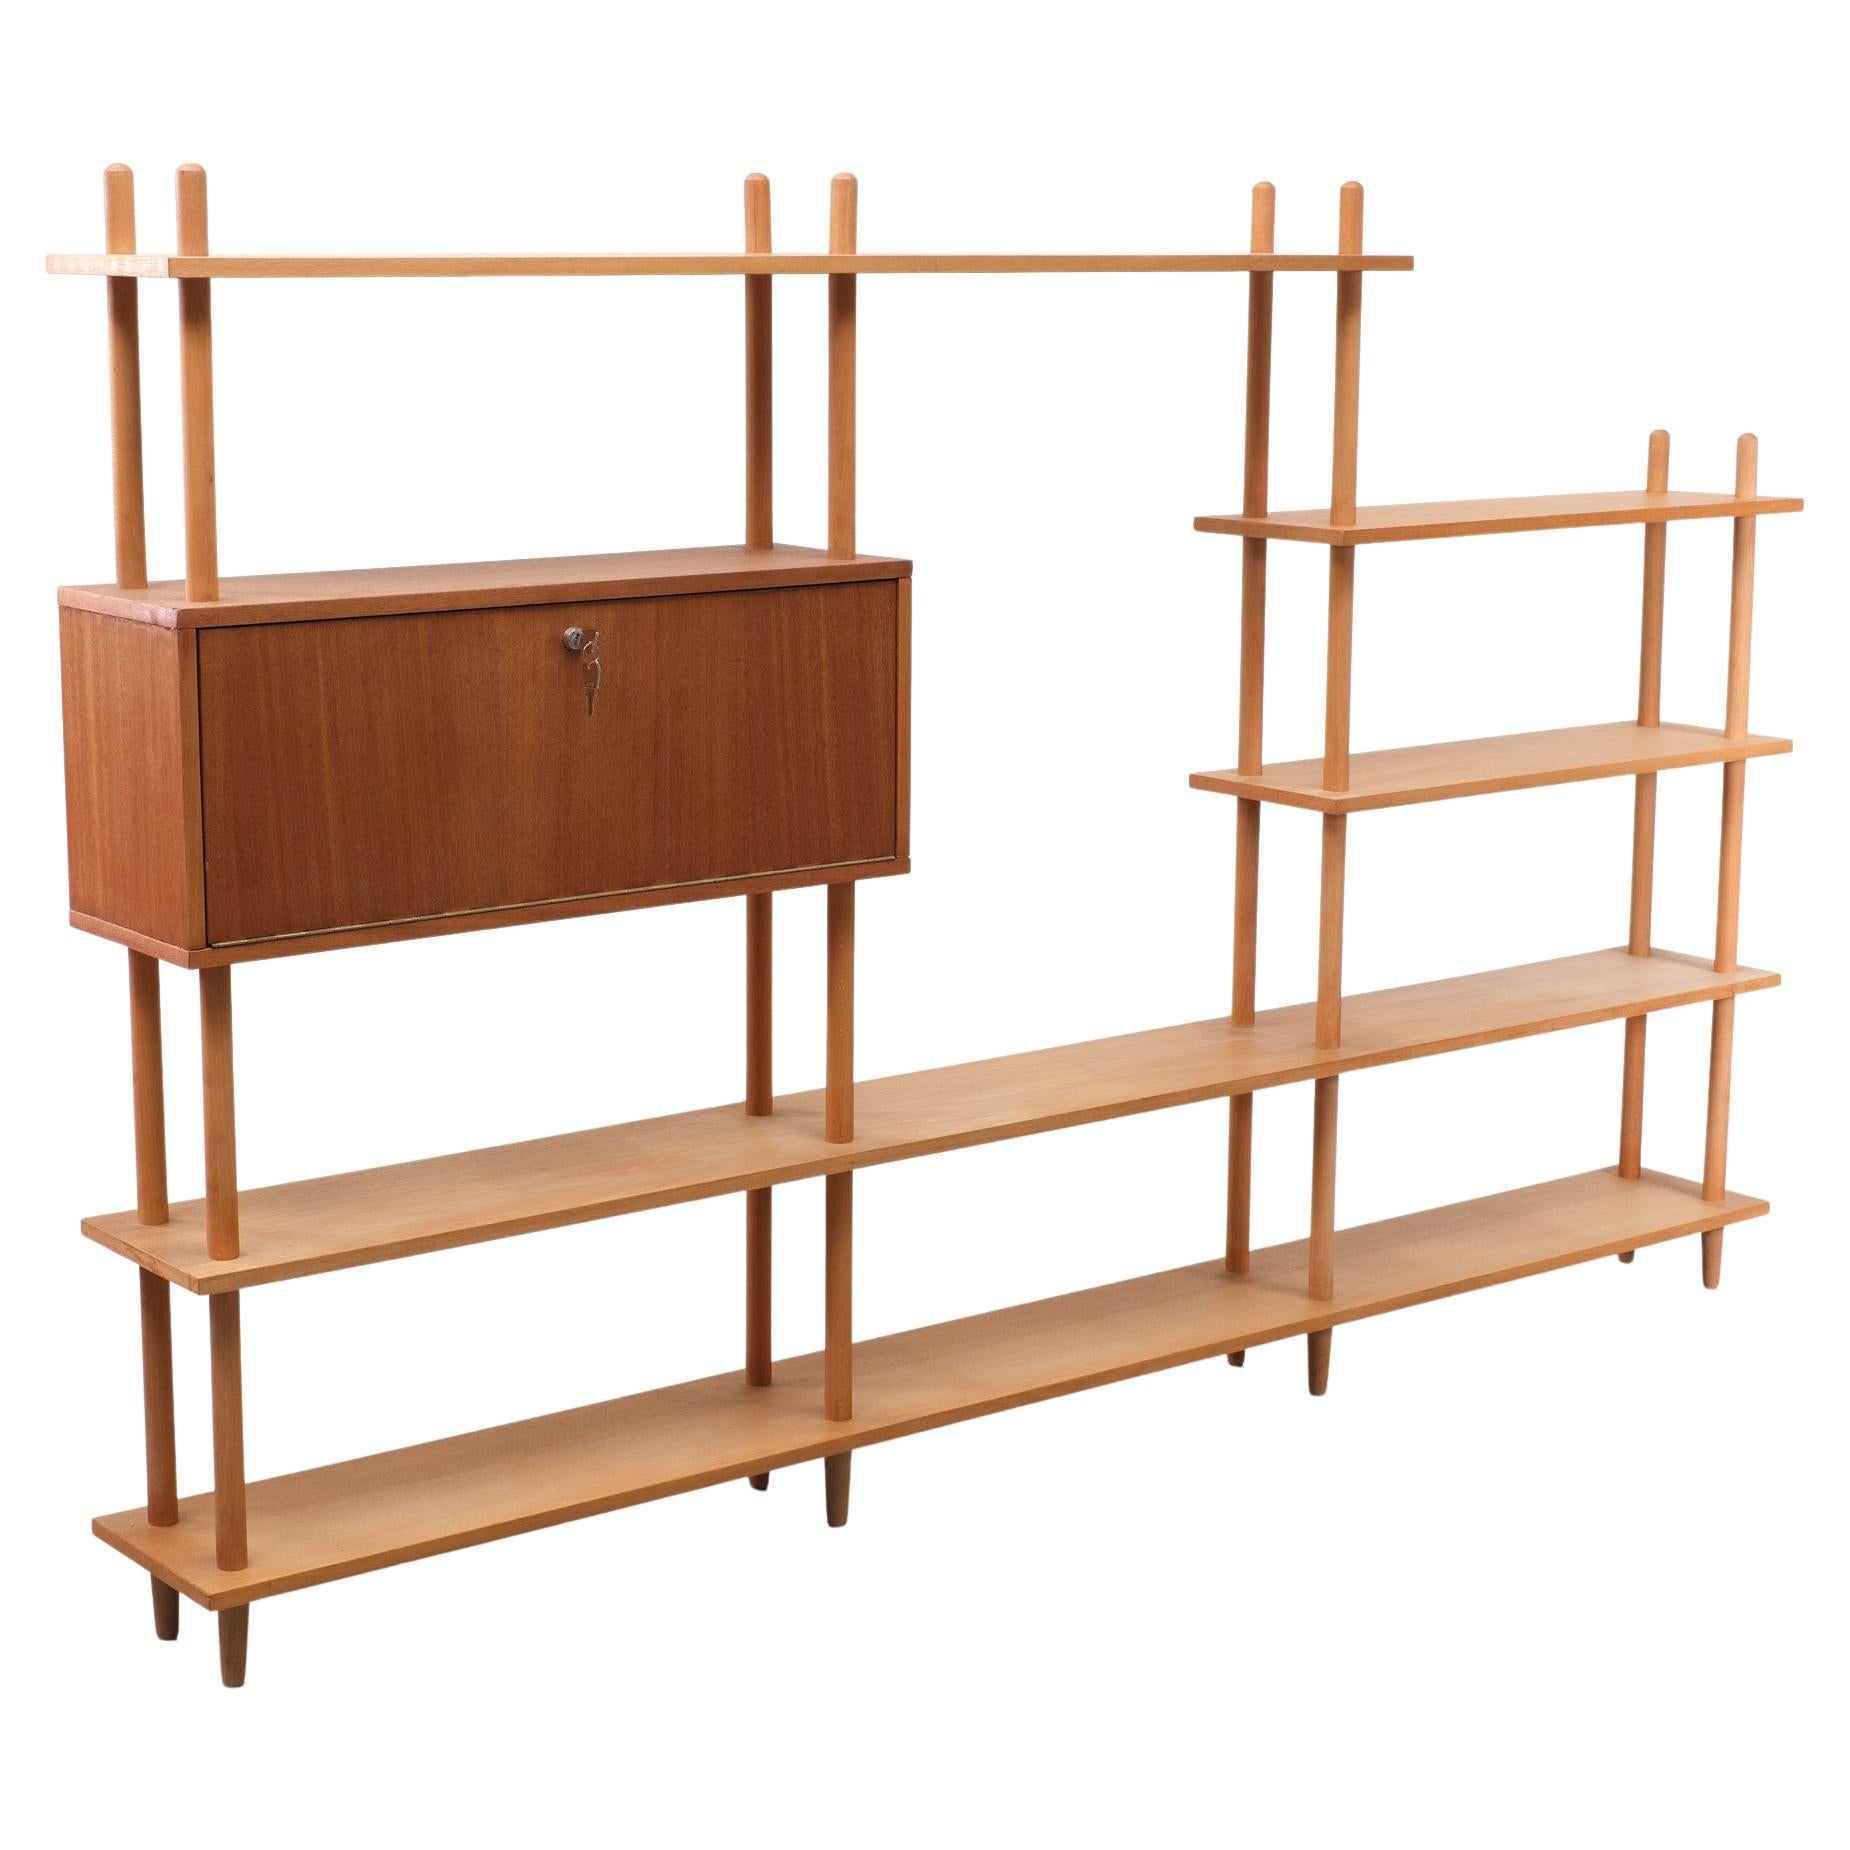 Vintage stick cabinet. A design by Willem Lutjens for Den Boer Gouda, the Netherlands, 1960s. One cabinet with lock.  The Beechwood shelves are pure ,so no lacker or wax .
Beechwood  cabinet with clean lines, can be used as a bookcase against the